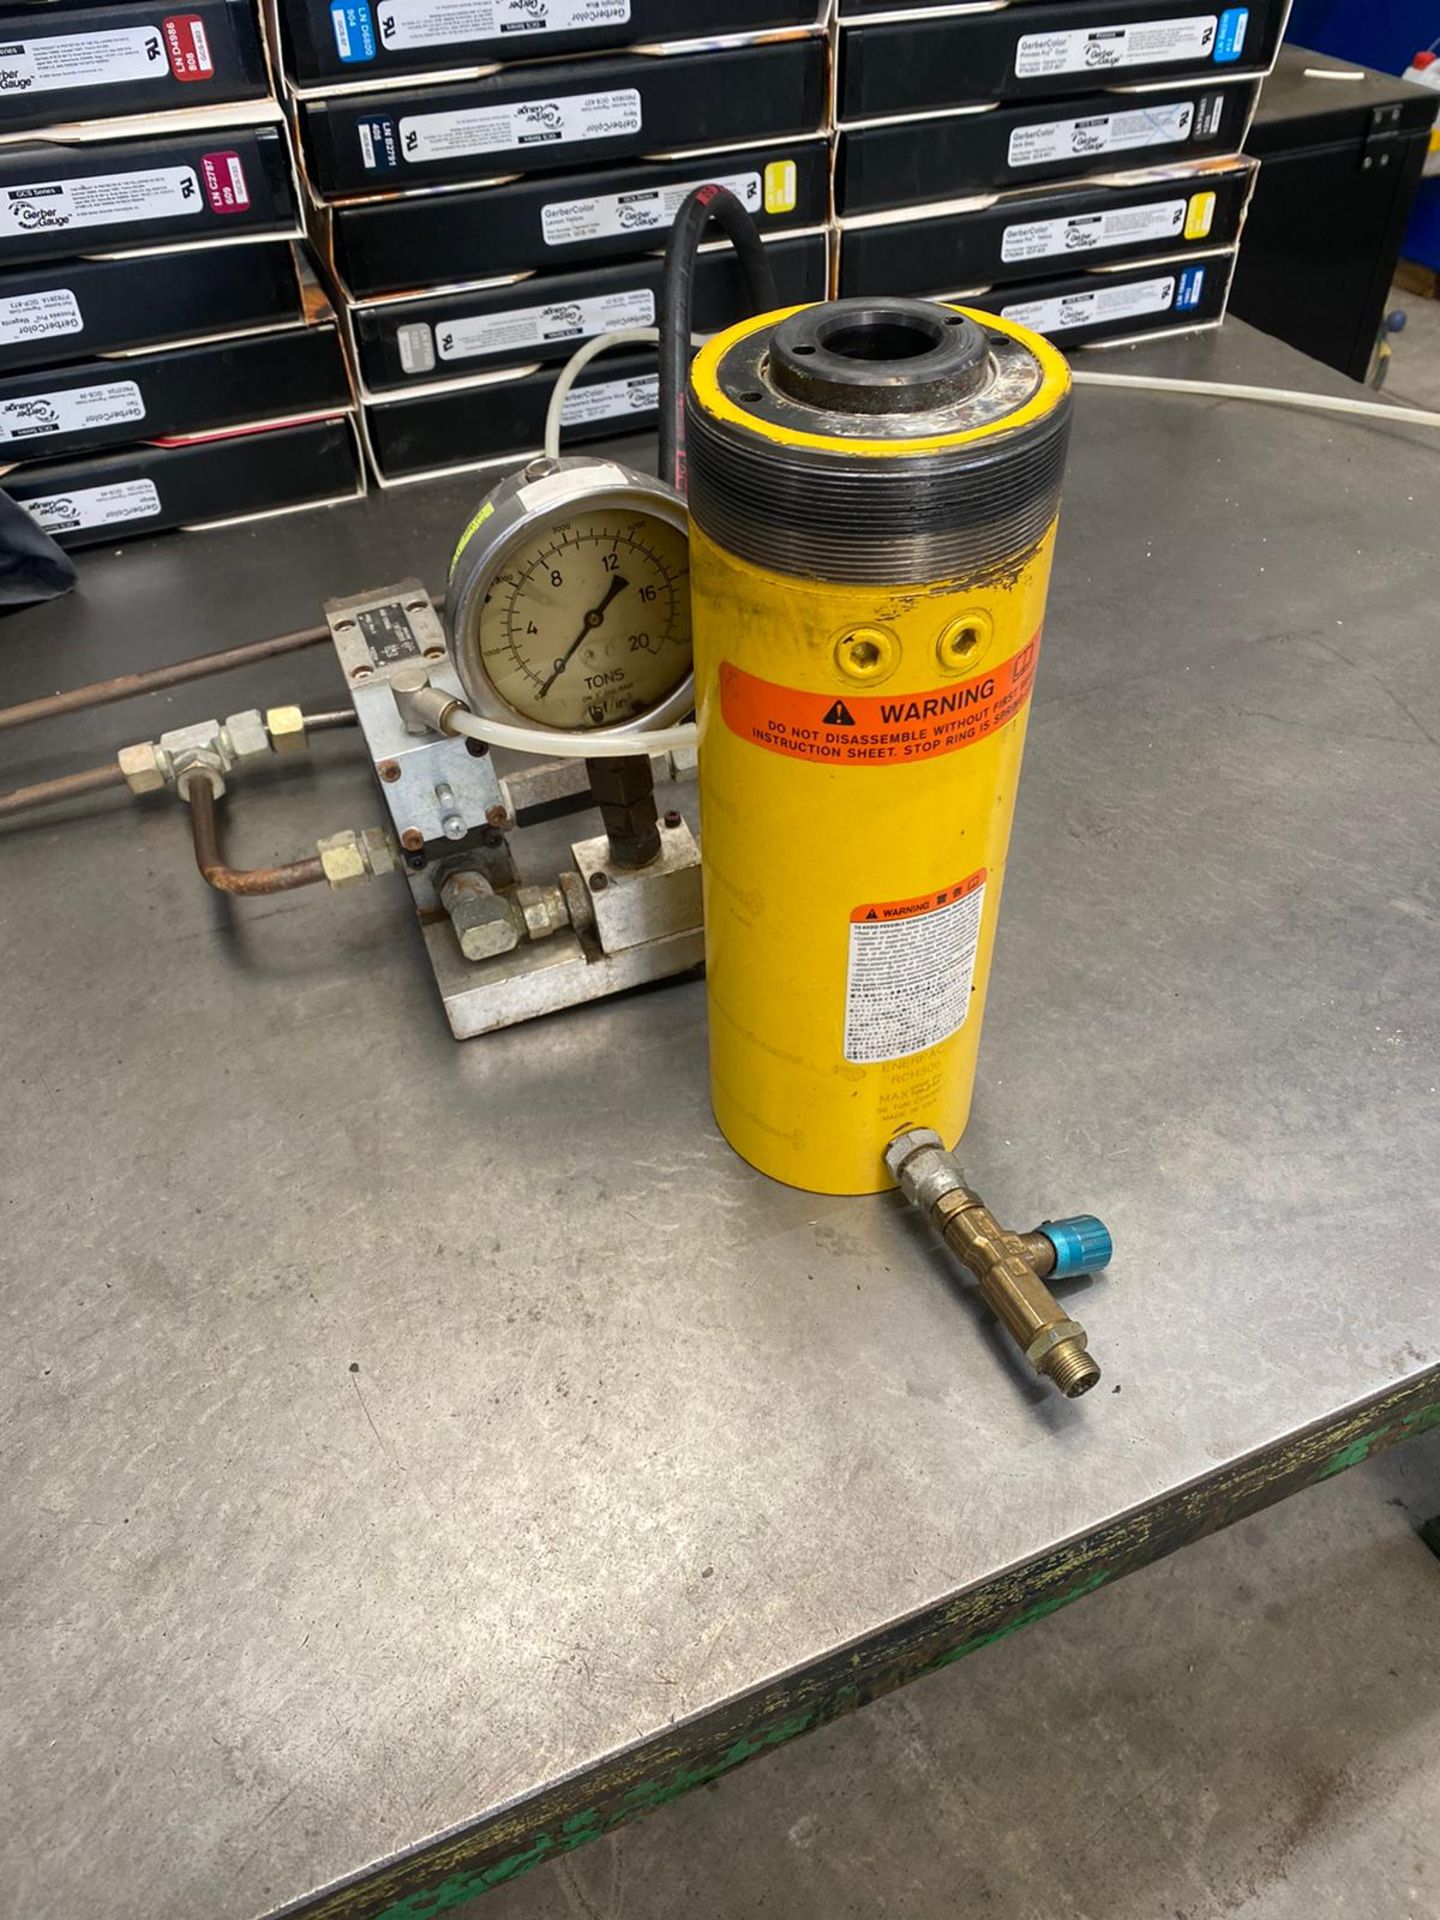 Two Enerpac RCH306 Hydraulic Cylinders, with controller, 30 tonne cap, loading free of charge - yes,